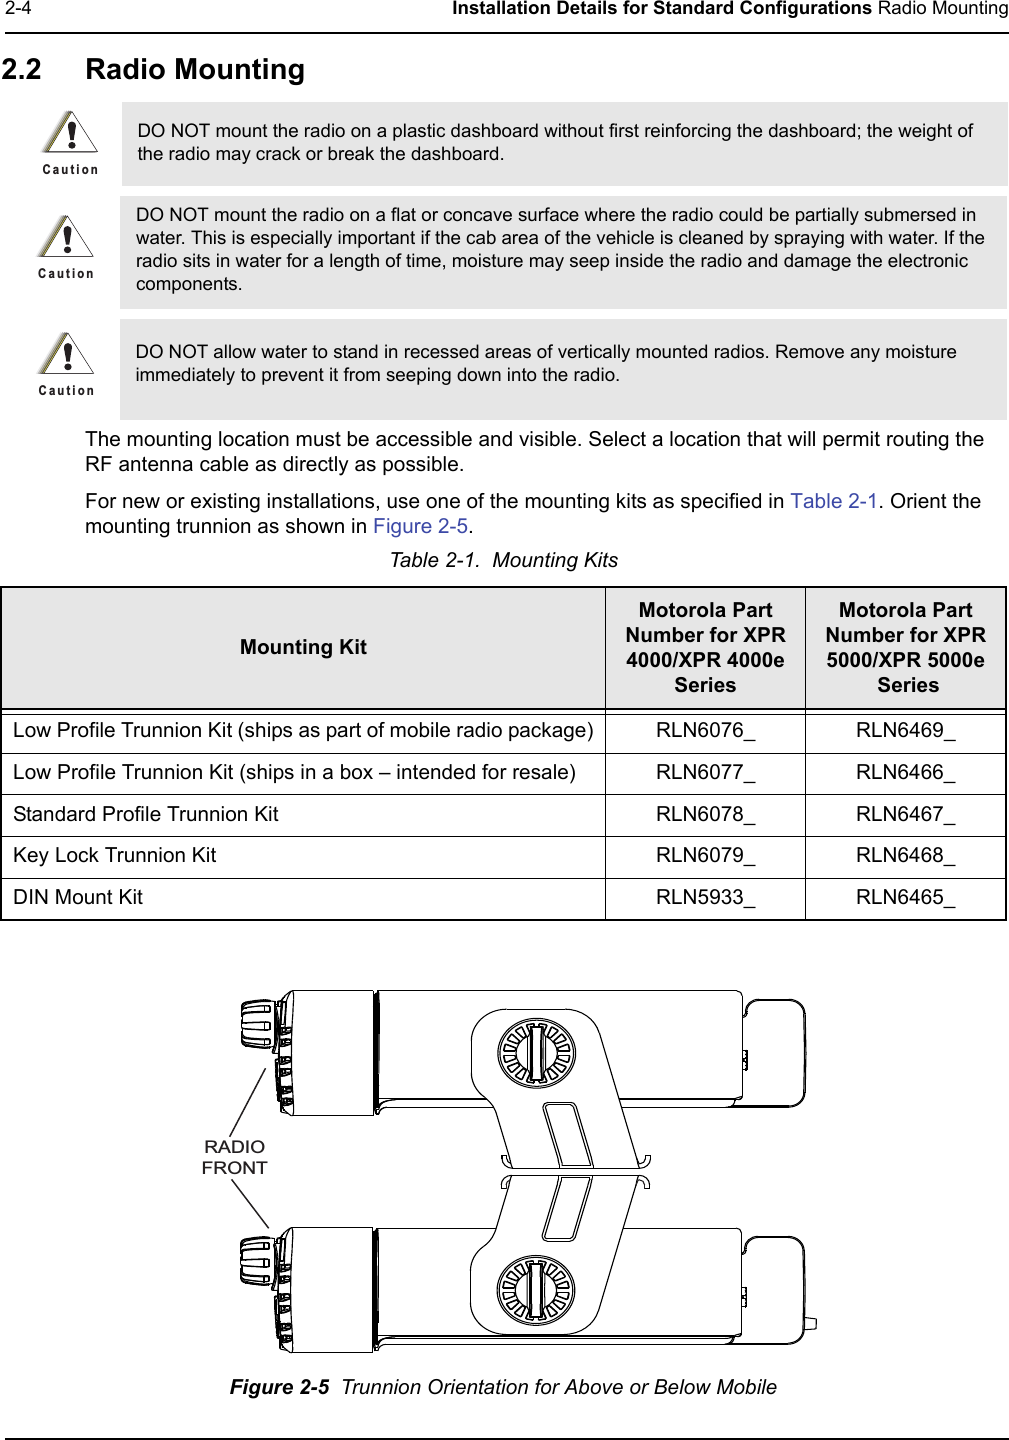 2-4 Installation Details for Standard Configurations Radio Mounting2.2 Radio Mounting  The mounting location must be accessible and visible. Select a location that will permit routing the RF antenna cable as directly as possible. For new or existing installations, use one of the mounting kits as specified in Table 2-1. Orient the mounting trunnion as shown in Figure 2-5.Figure 2-5  Trunnion Orientation for Above or Below MobileDO NOT mount the radio on a plastic dashboard without first reinforcing the dashboard; the weight of the radio may crack or break the dashboard.DO NOT mount the radio on a flat or concave surface where the radio could be partially submersed in water. This is especially important if the cab area of the vehicle is cleaned by spraying with water. If the radio sits in water for a length of time, moisture may seep inside the radio and damage the electronic components.DO NOT allow water to stand in recessed areas of vertically mounted radios. Remove any moisture immediately to prevent it from seeping down into the radio.Table 2-1.  Mounting KitsMounting KitMotorola Part Number for XPR 4000/XPR 4000eSeriesMotorola Part Number for XPR 5000/XPR 5000e SeriesLow Profile Trunnion Kit (ships as part of mobile radio package) RLN6076_ RLN6469_Low Profile Trunnion Kit (ships in a box – intended for resale) RLN6077_ RLN6466_Standard Profile Trunnion Kit RLN6078_ RLN6467_Key Lock Trunnion Kit RLN6079_ RLN6468_DIN Mount Kit RLN5933_ RLN6465_C a u t i o nC a u t i o nC a u t i o nRADIOFRONT